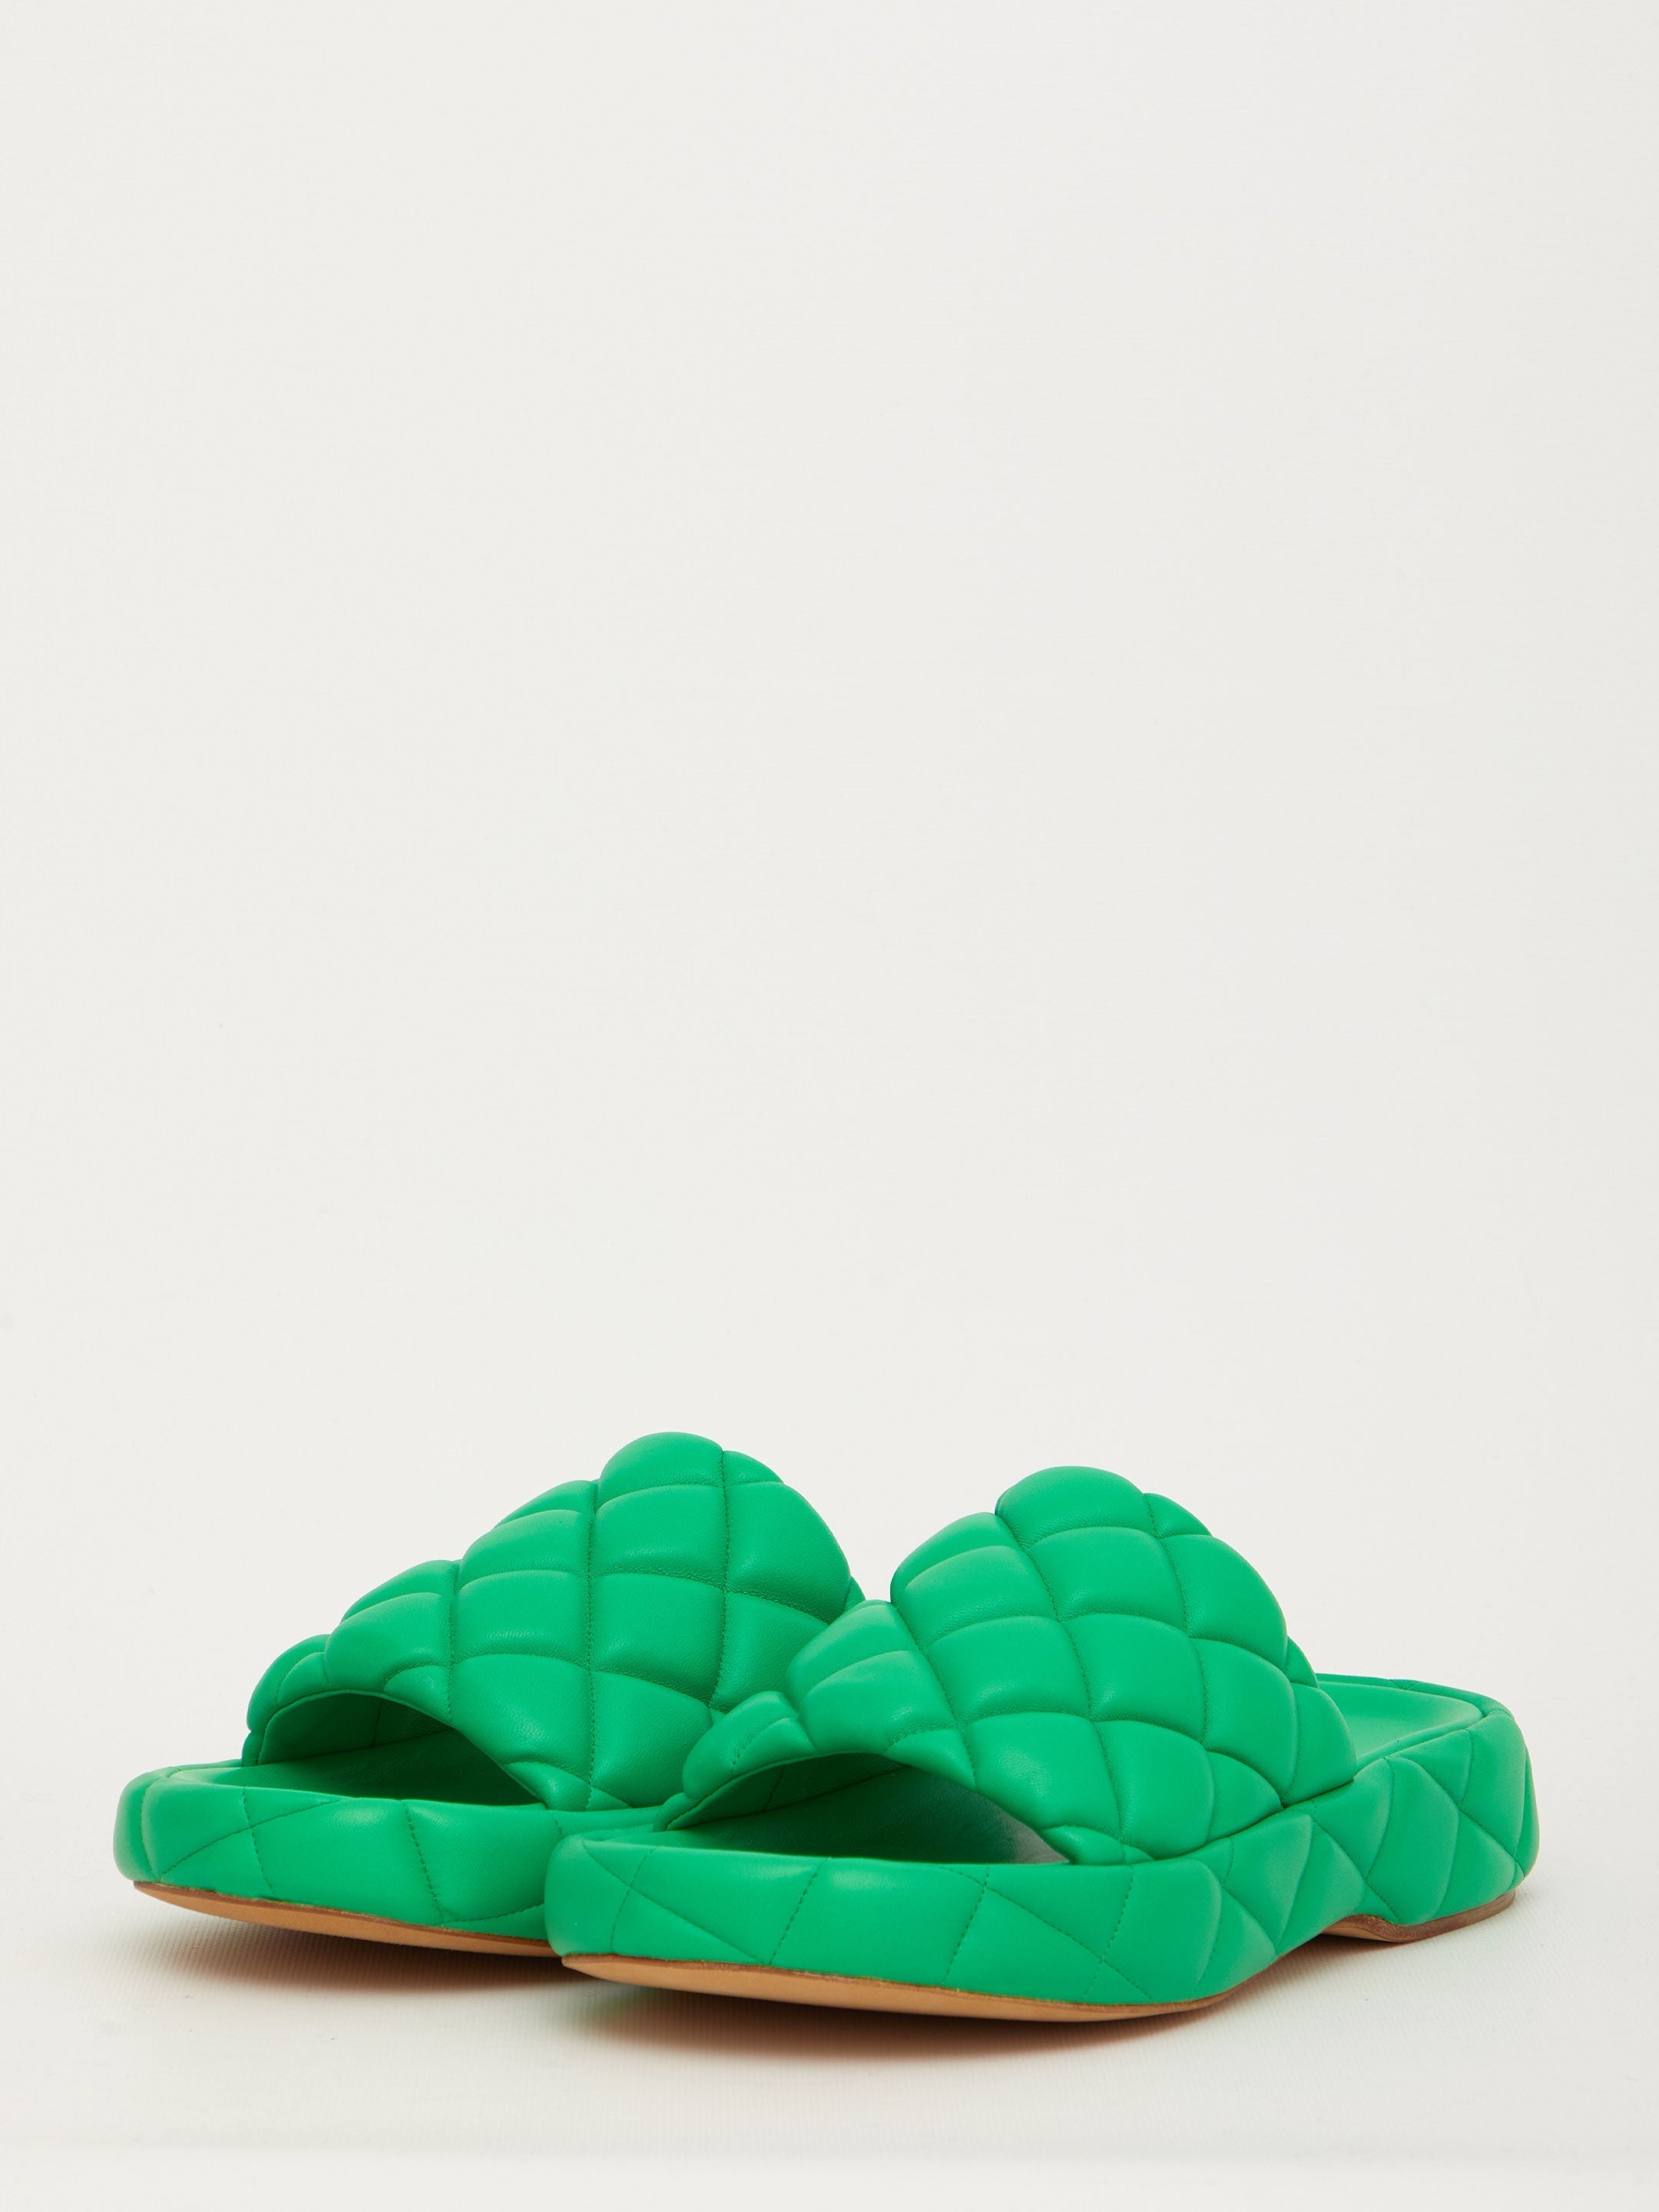 Padded green sandals